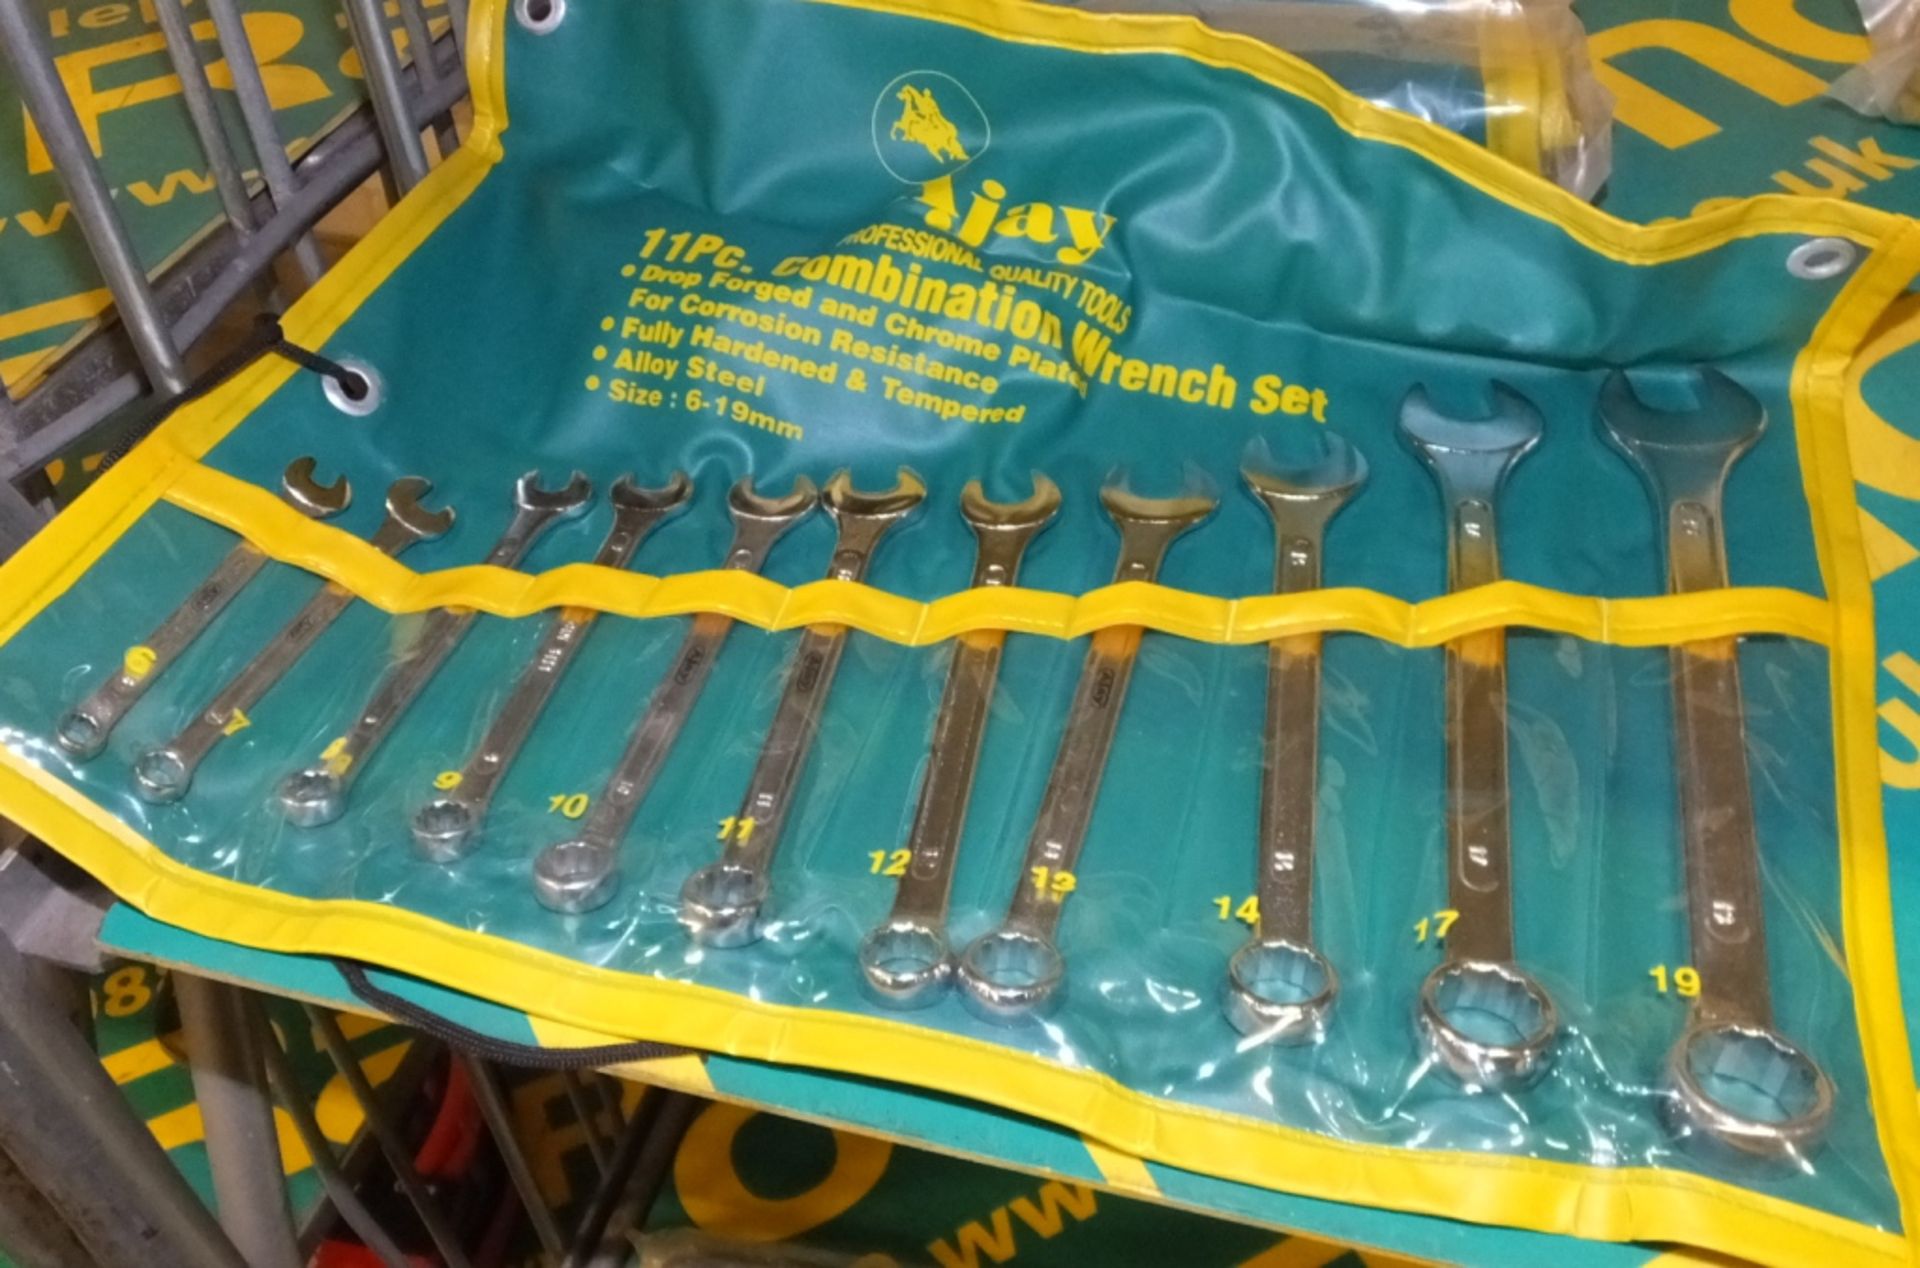 3x Ajay 11 piece combinatiion wrench sets - Image 2 of 2